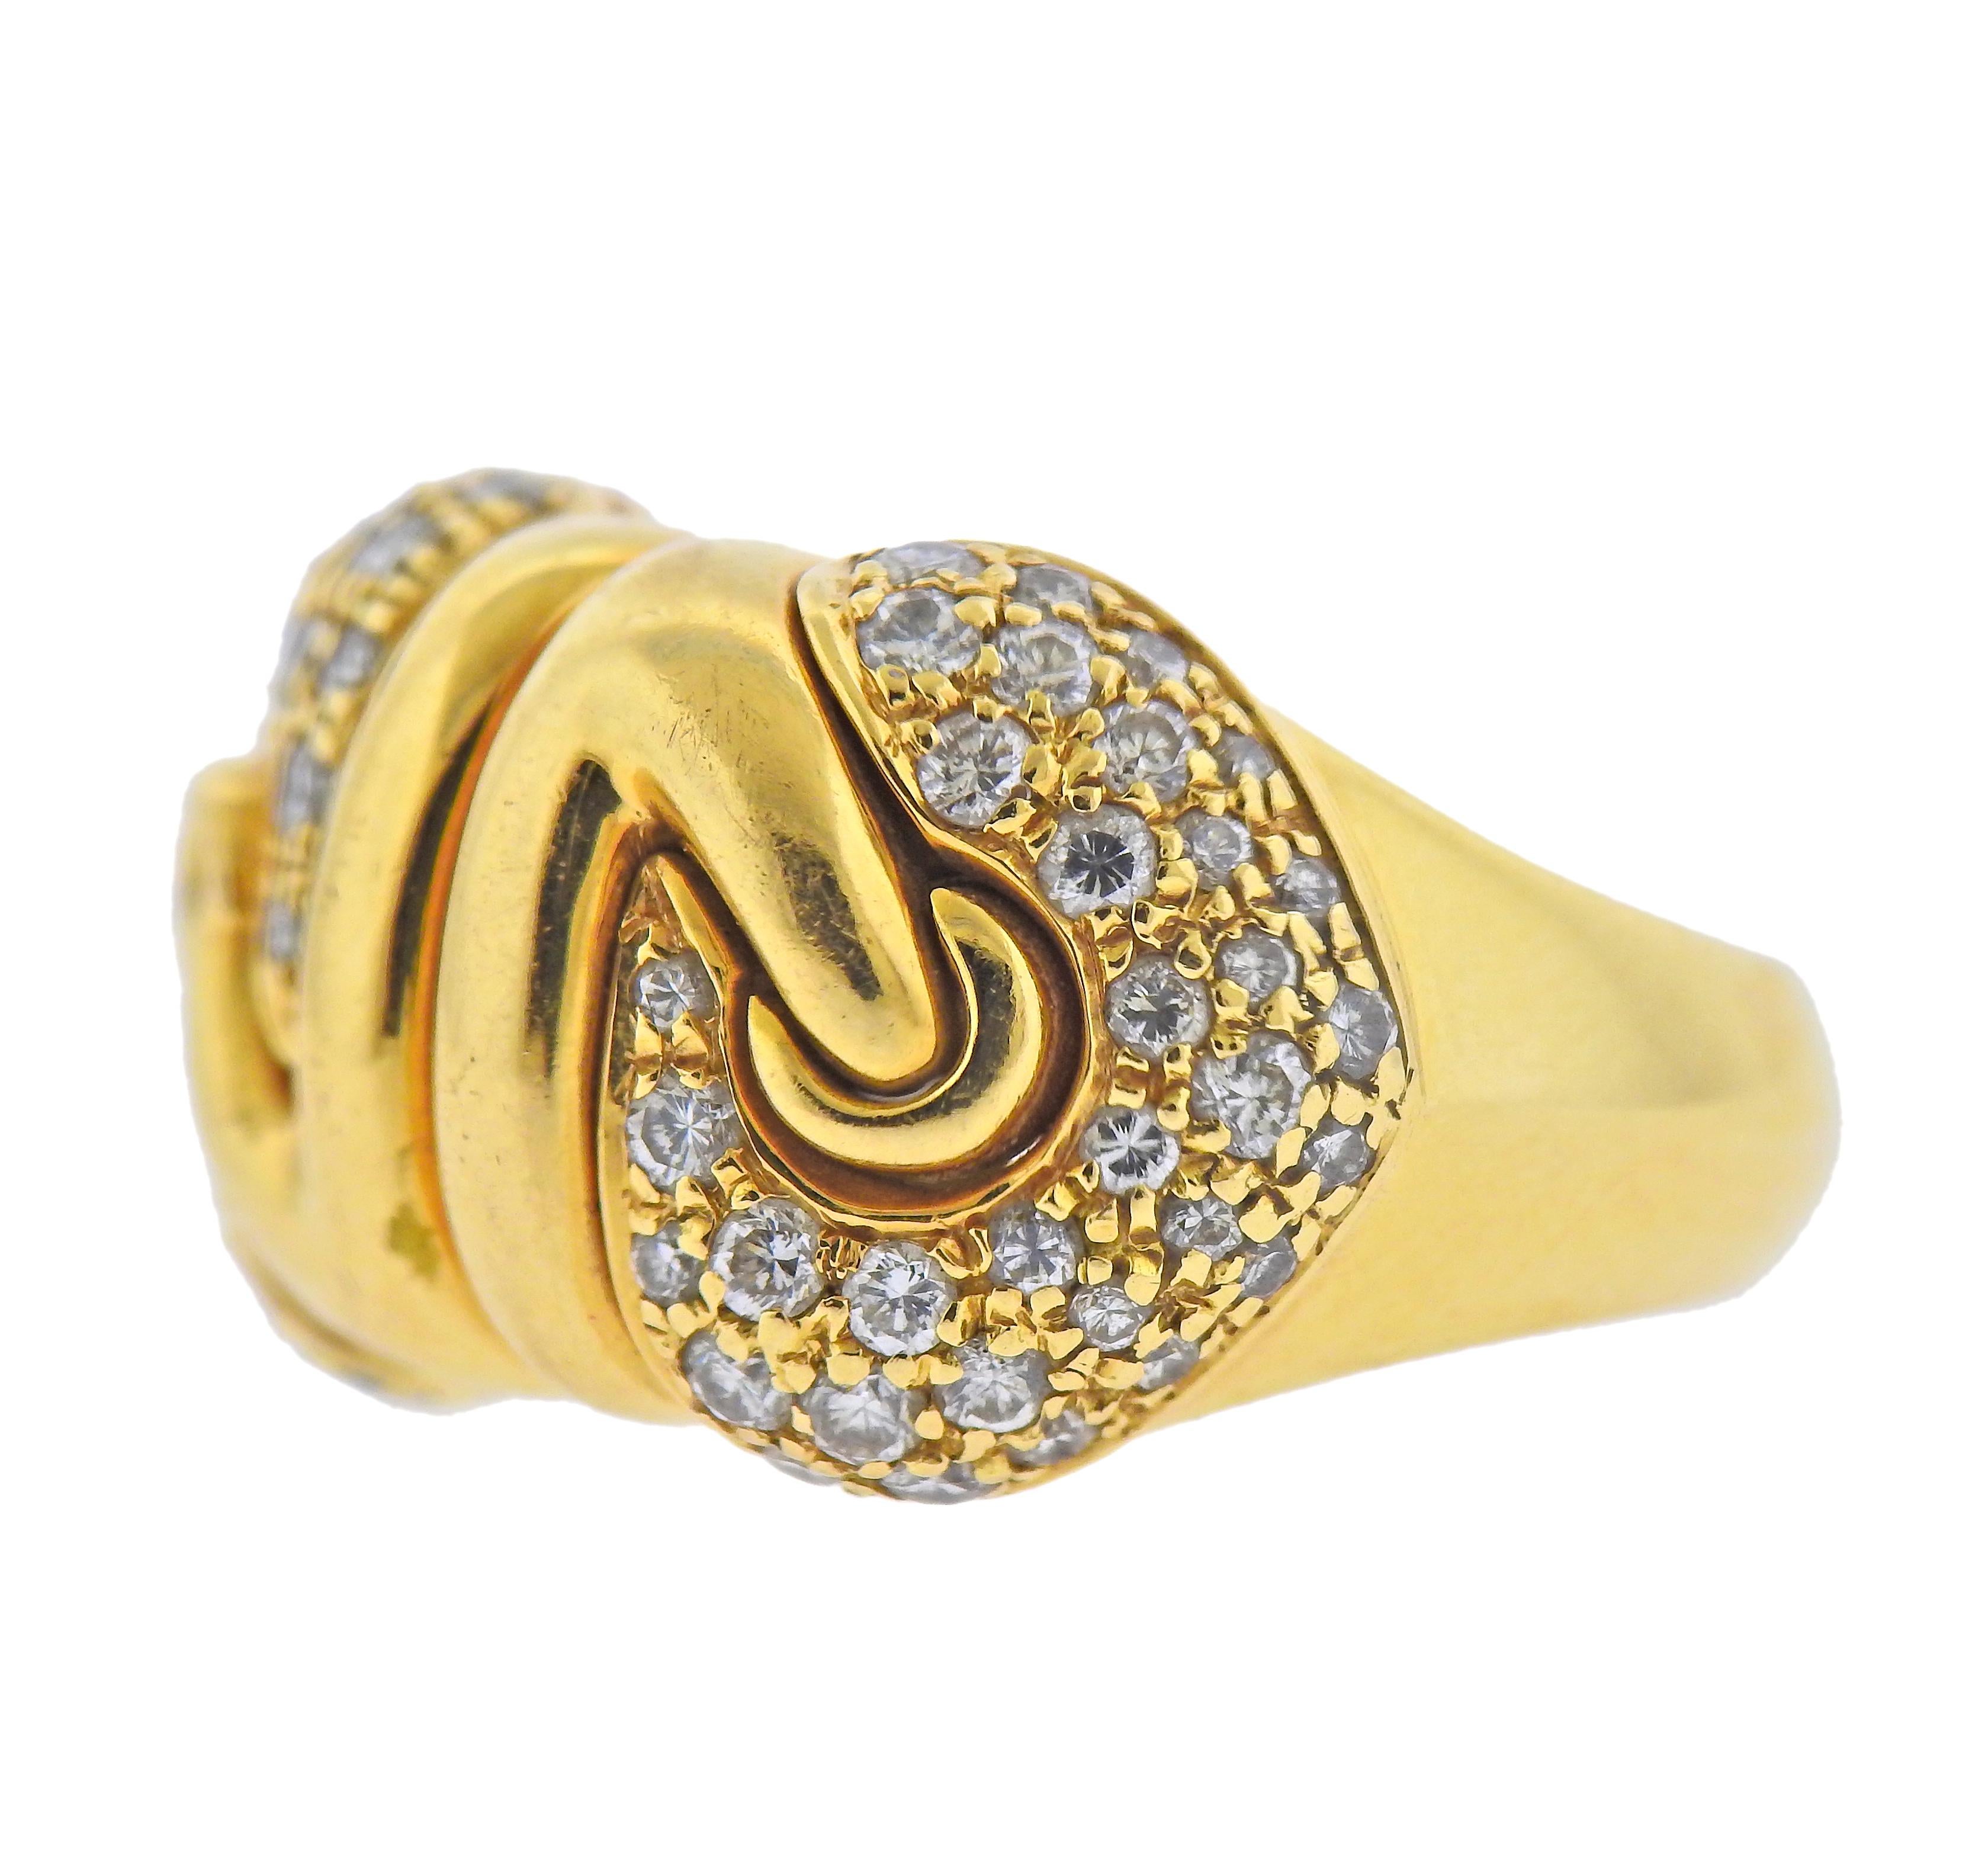 18k yellow gold Doppio Cuore diamond ring by Bvlgari, with approx. 0.60ctw in diamonds. Ring size - 7.25, ring top is 16mm wide. Marked: Bvlgari, 750, Italian mark. Weight - 17 grams. 